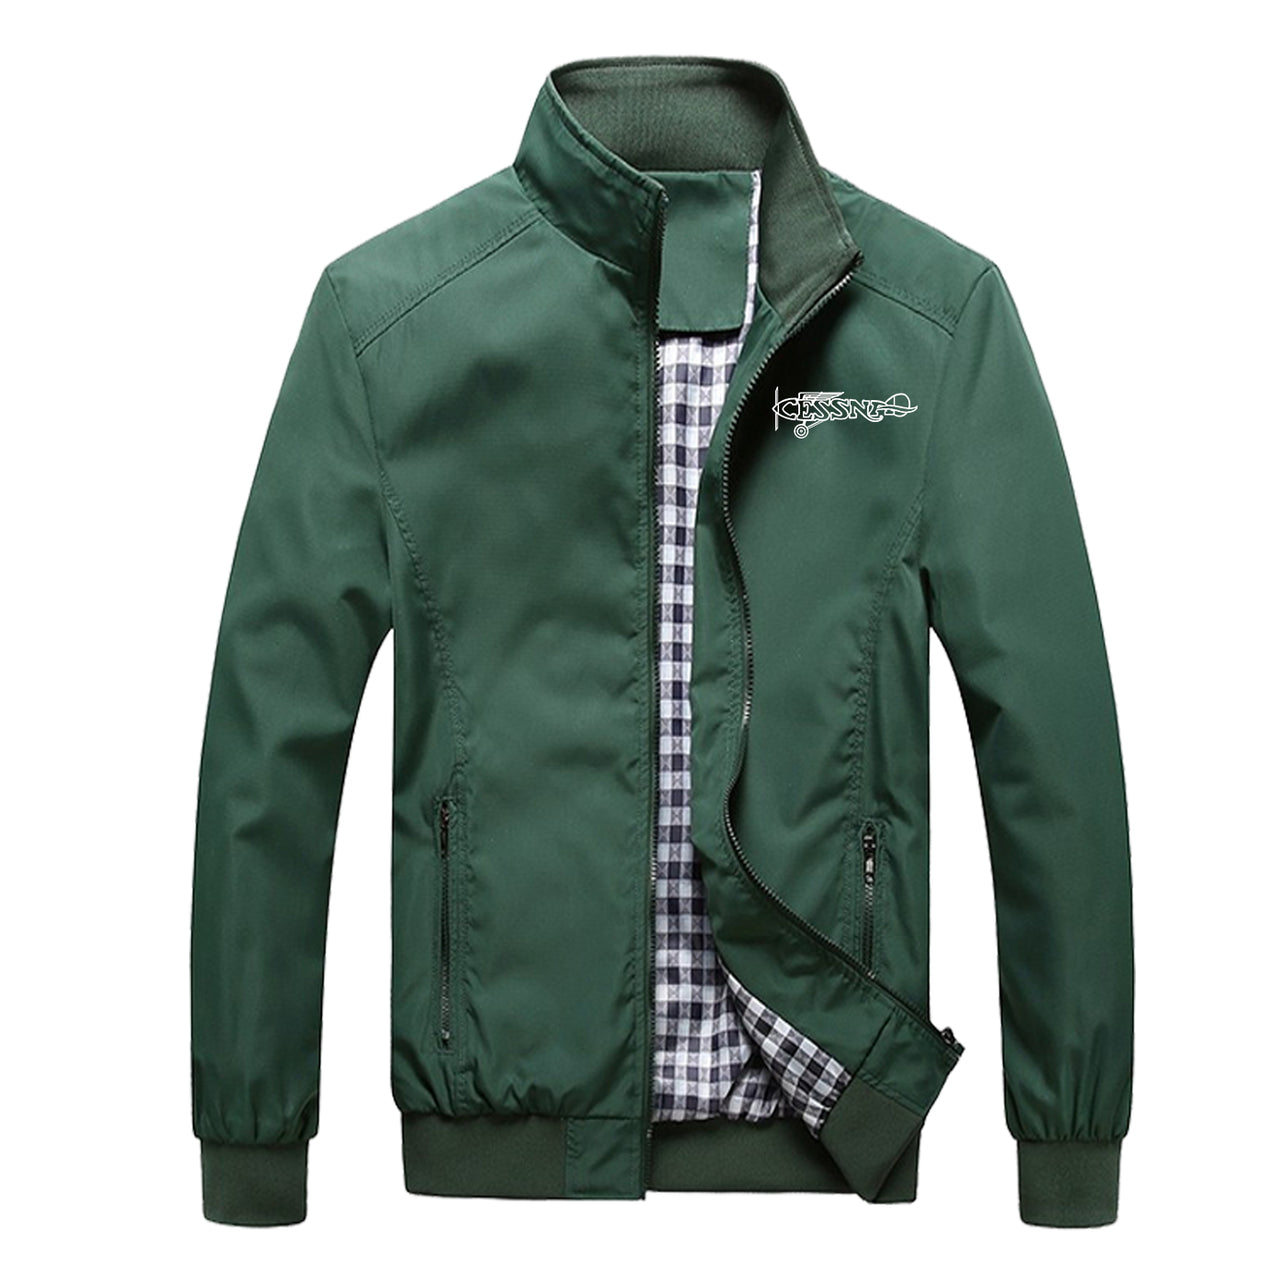 Special Cessna Text Designed Stylish Jackets